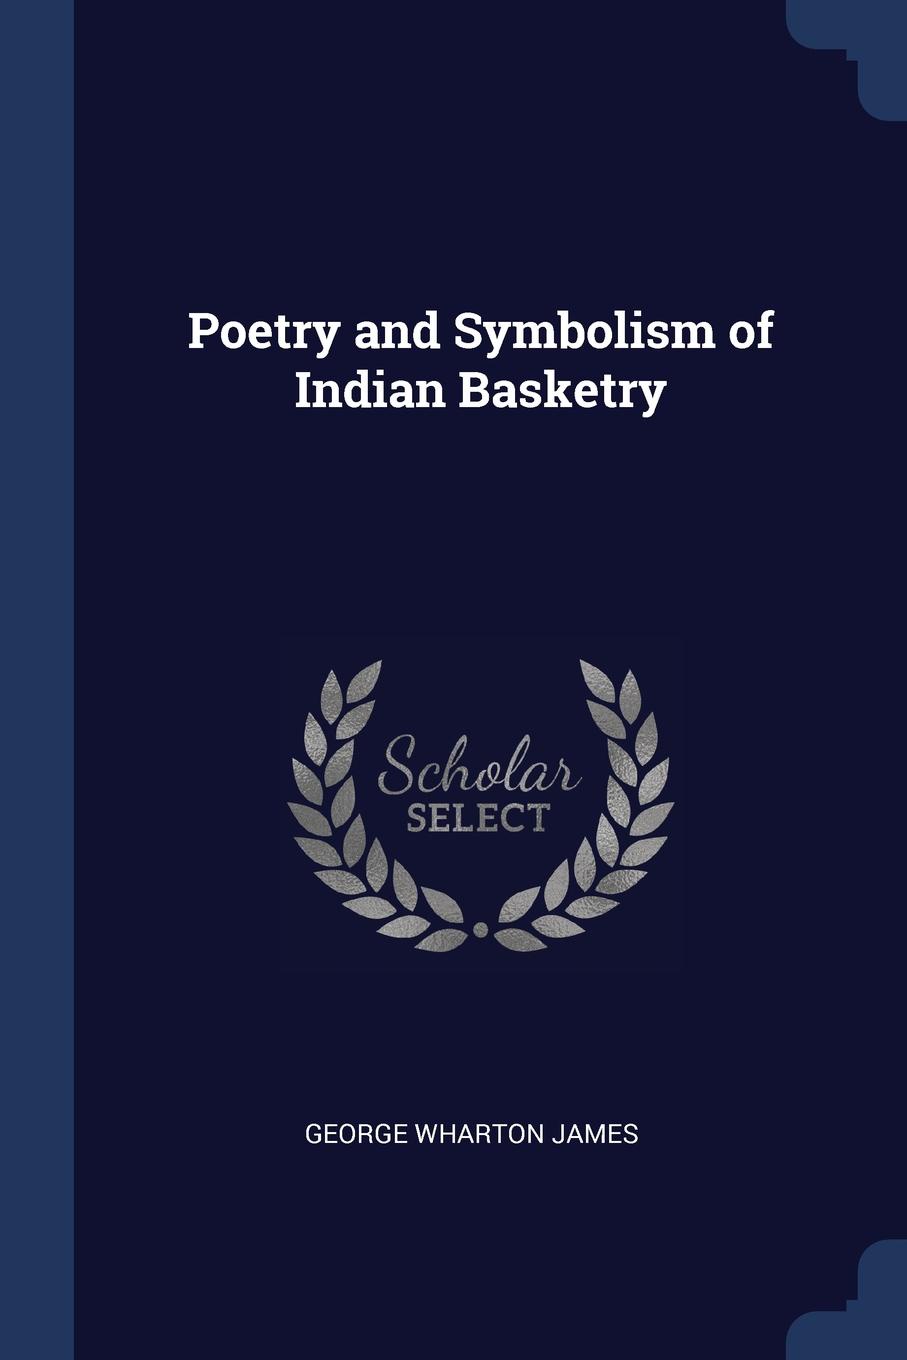 Poetry and Symbolism of Indian Basketry